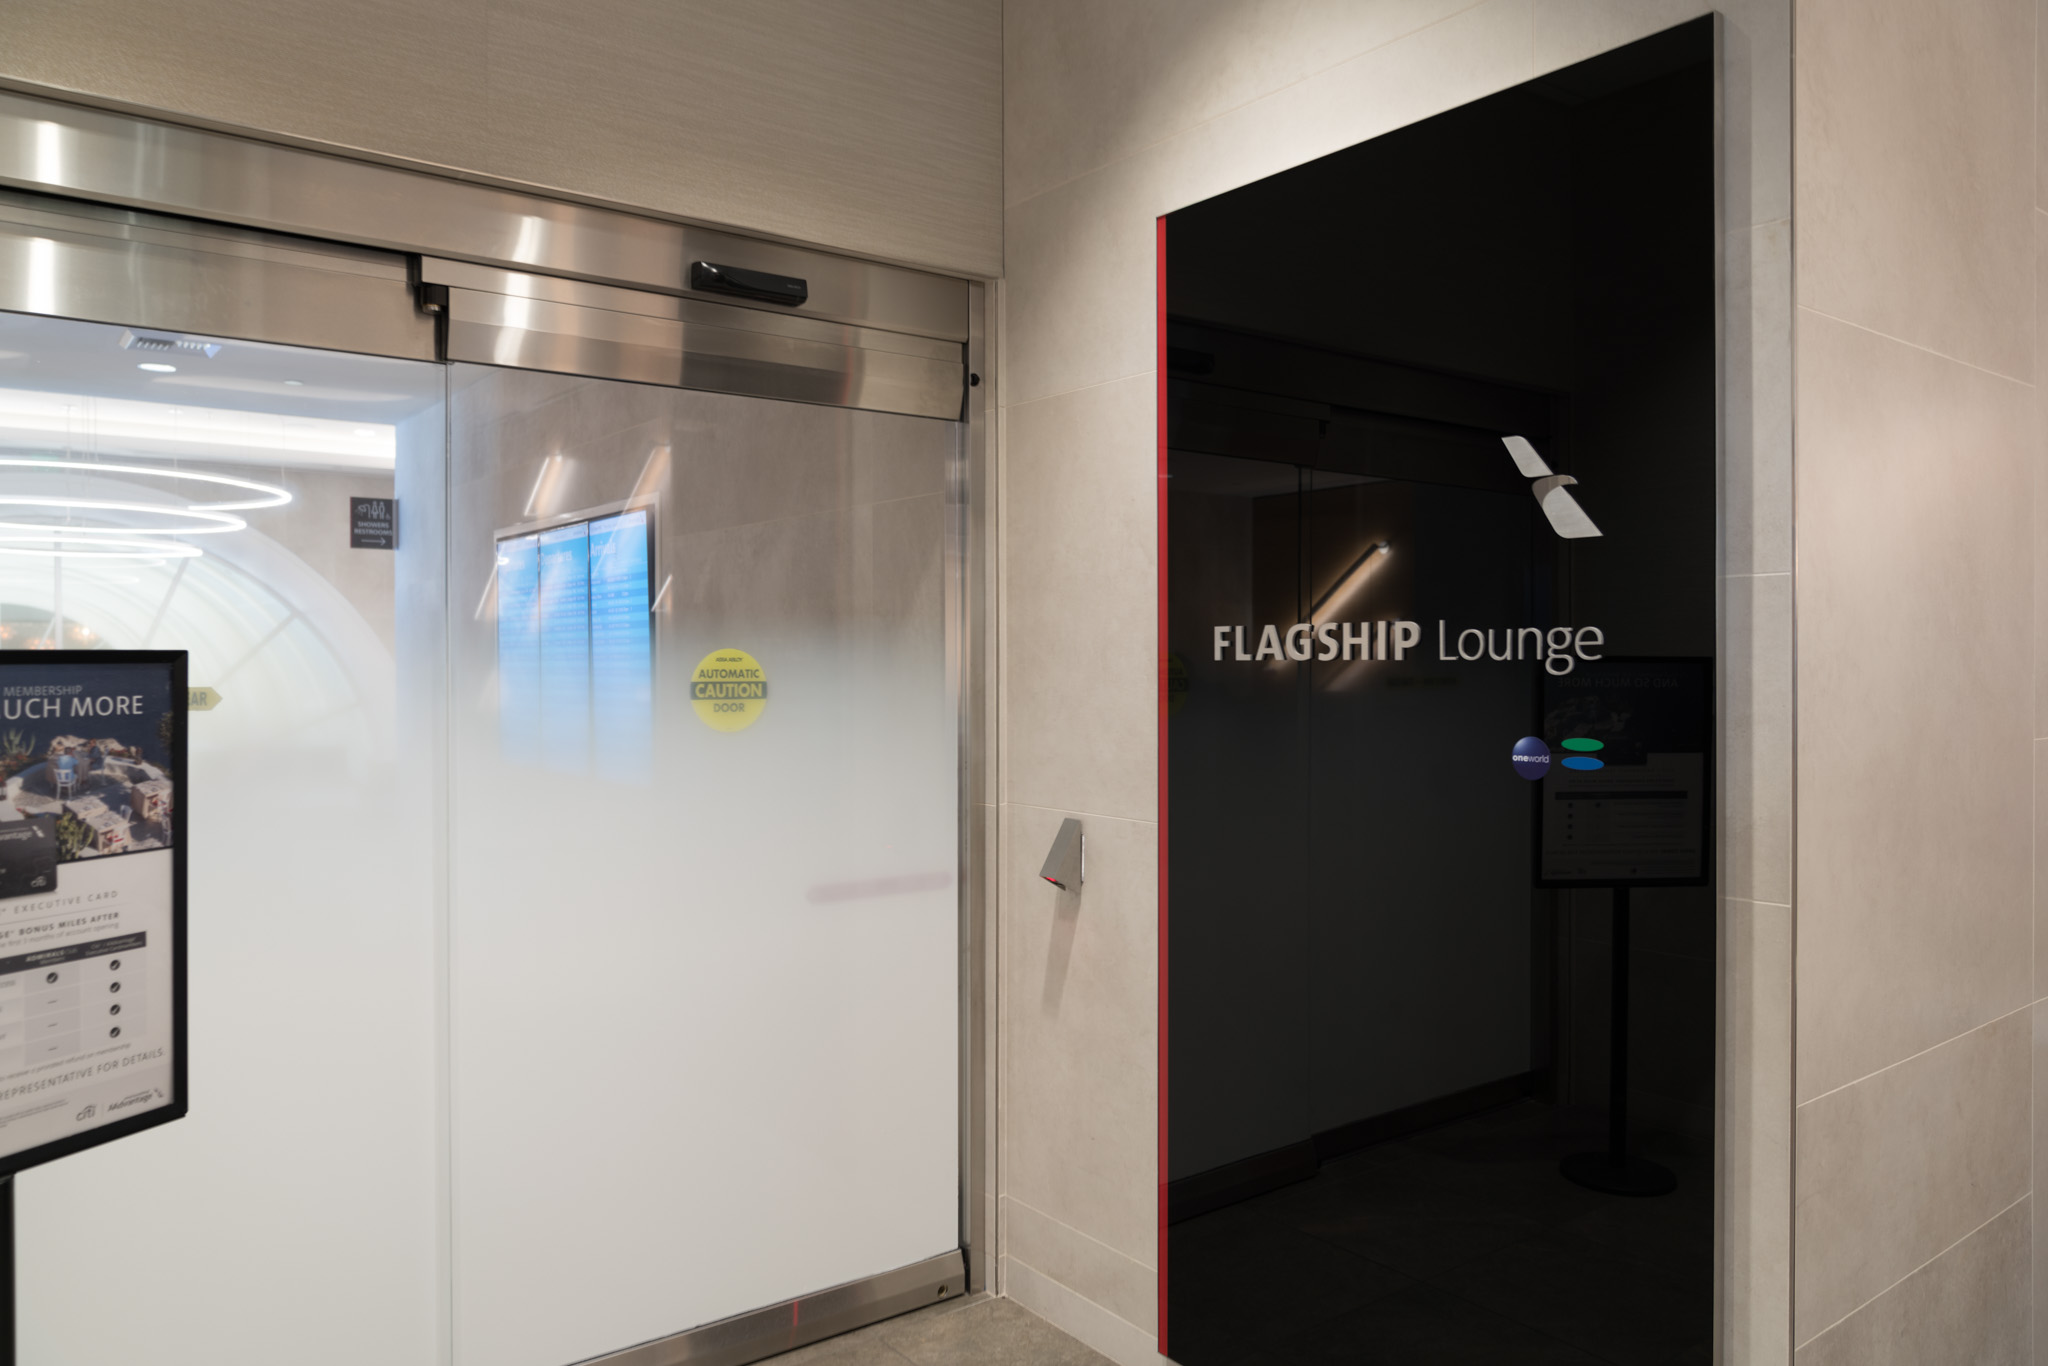 American Airlines LAX Flagship Lounge Review